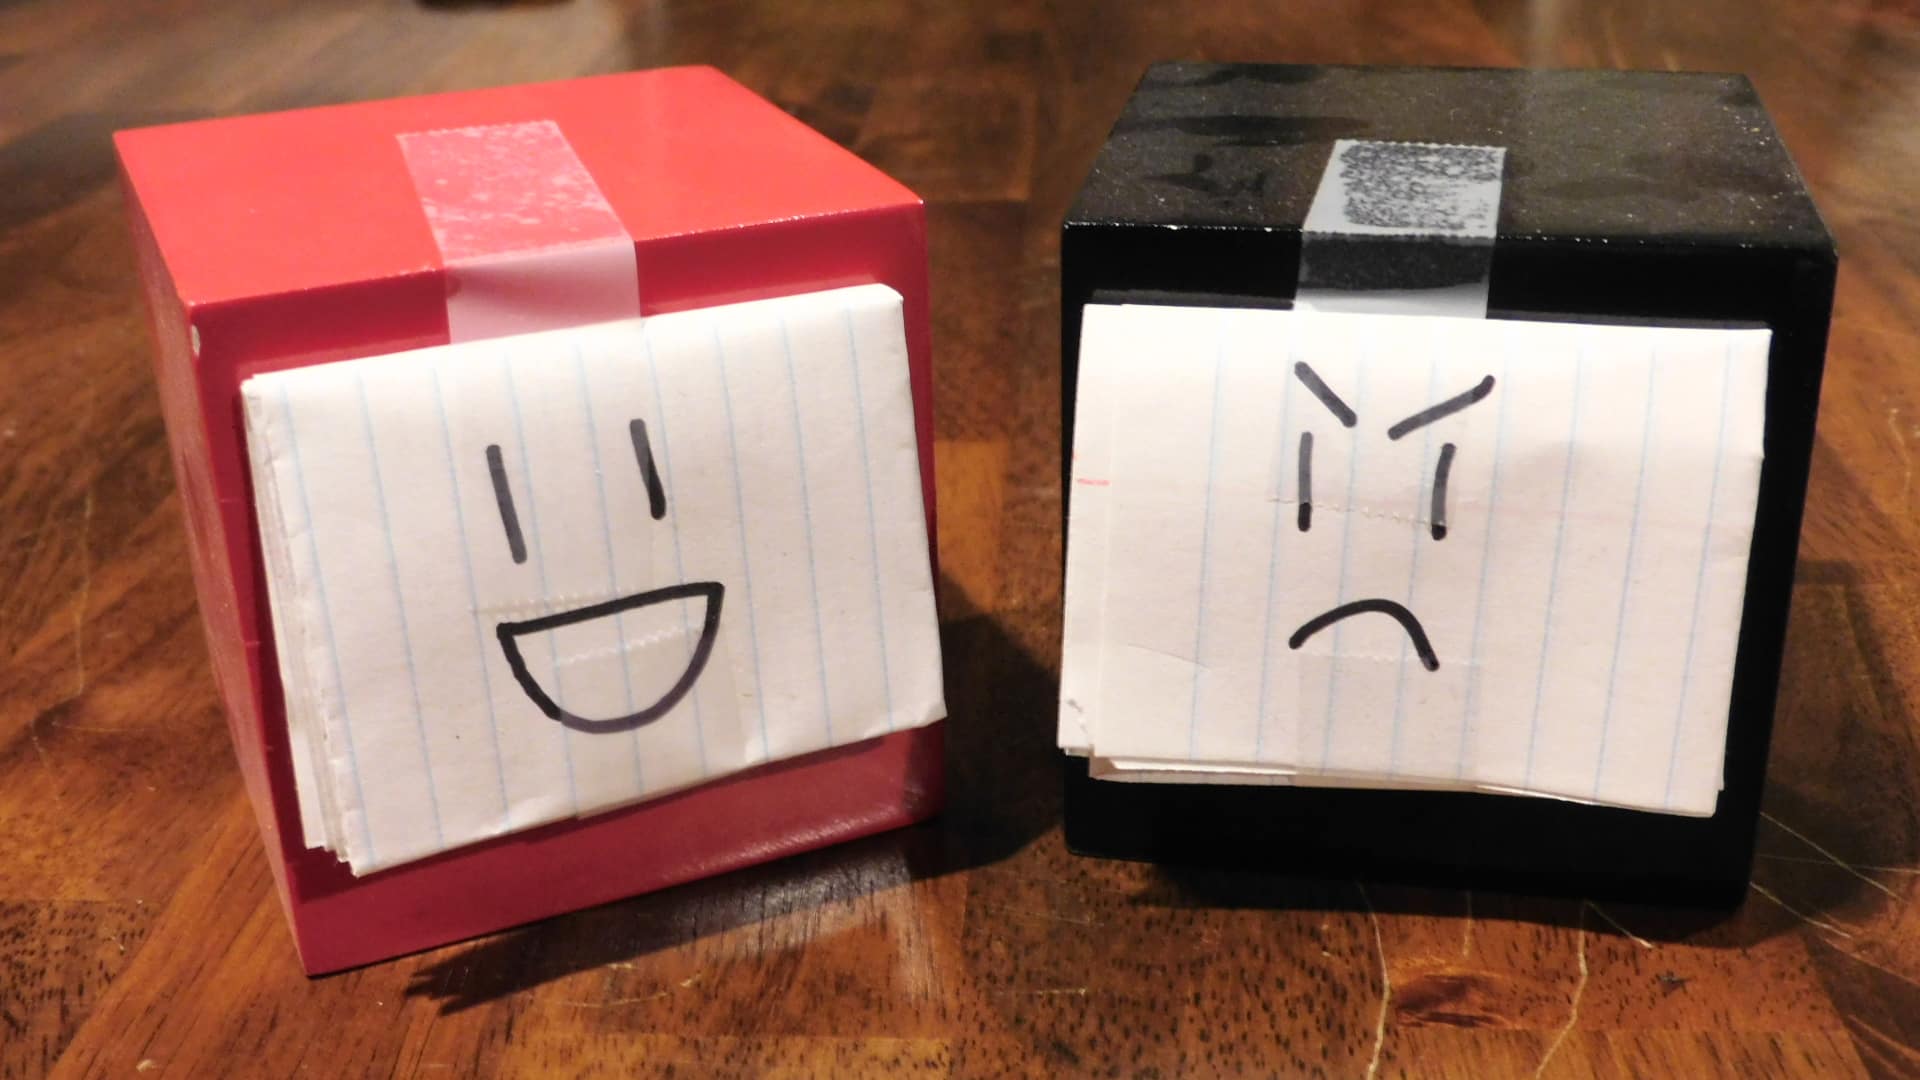 A black cube next to a red cube. Both have faces on pieces of paper taped to them.